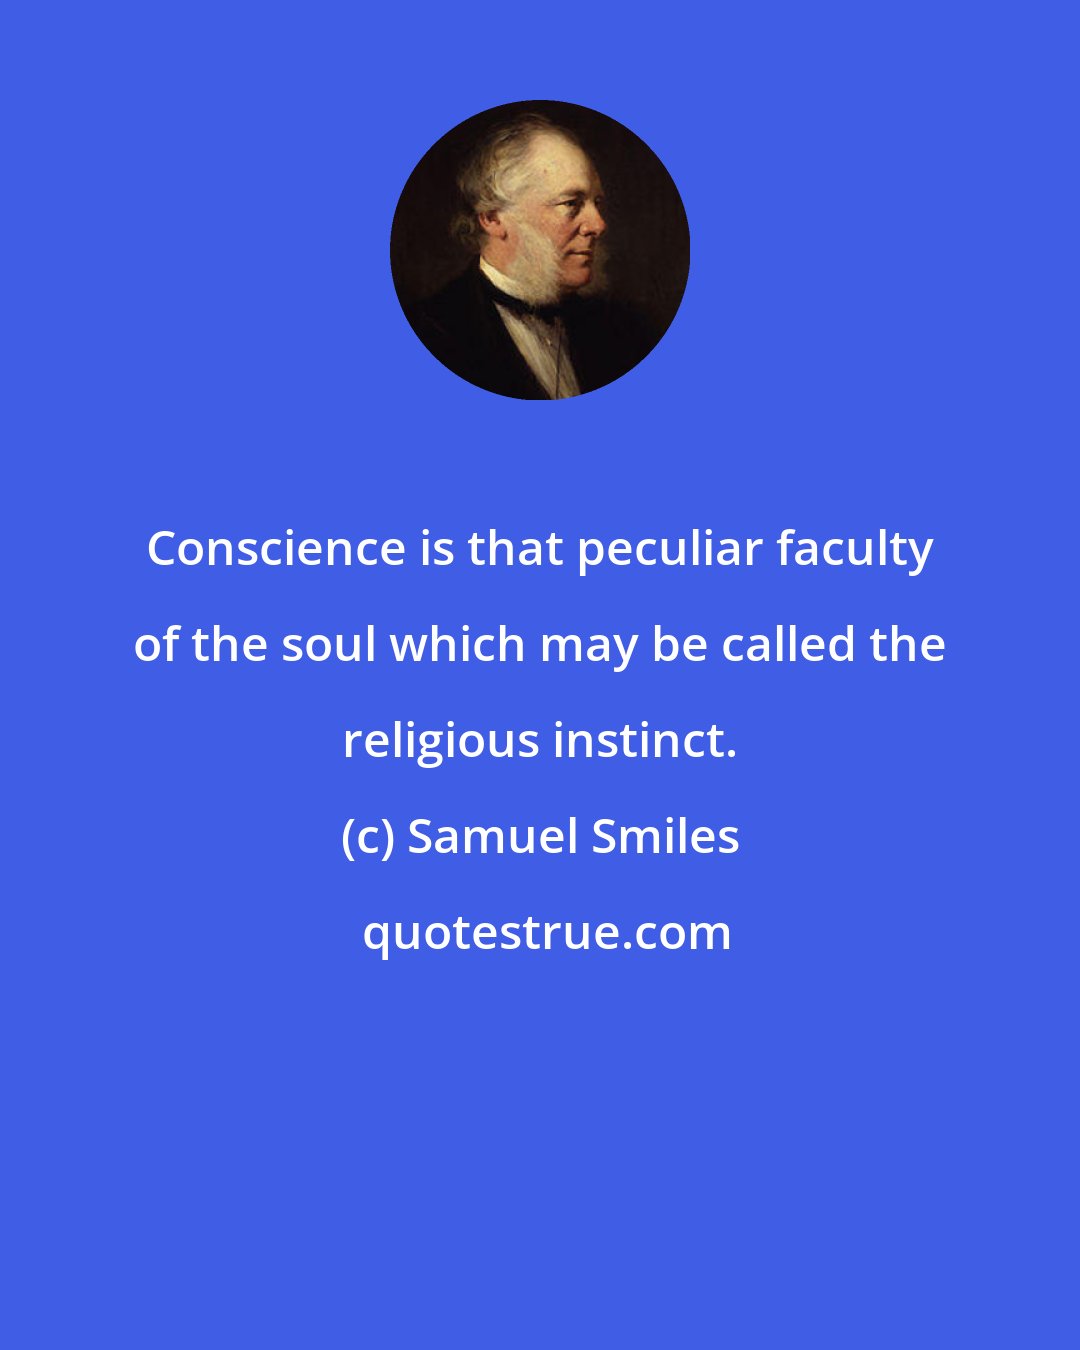 Samuel Smiles: Conscience is that peculiar faculty of the soul which may be called the religious instinct.